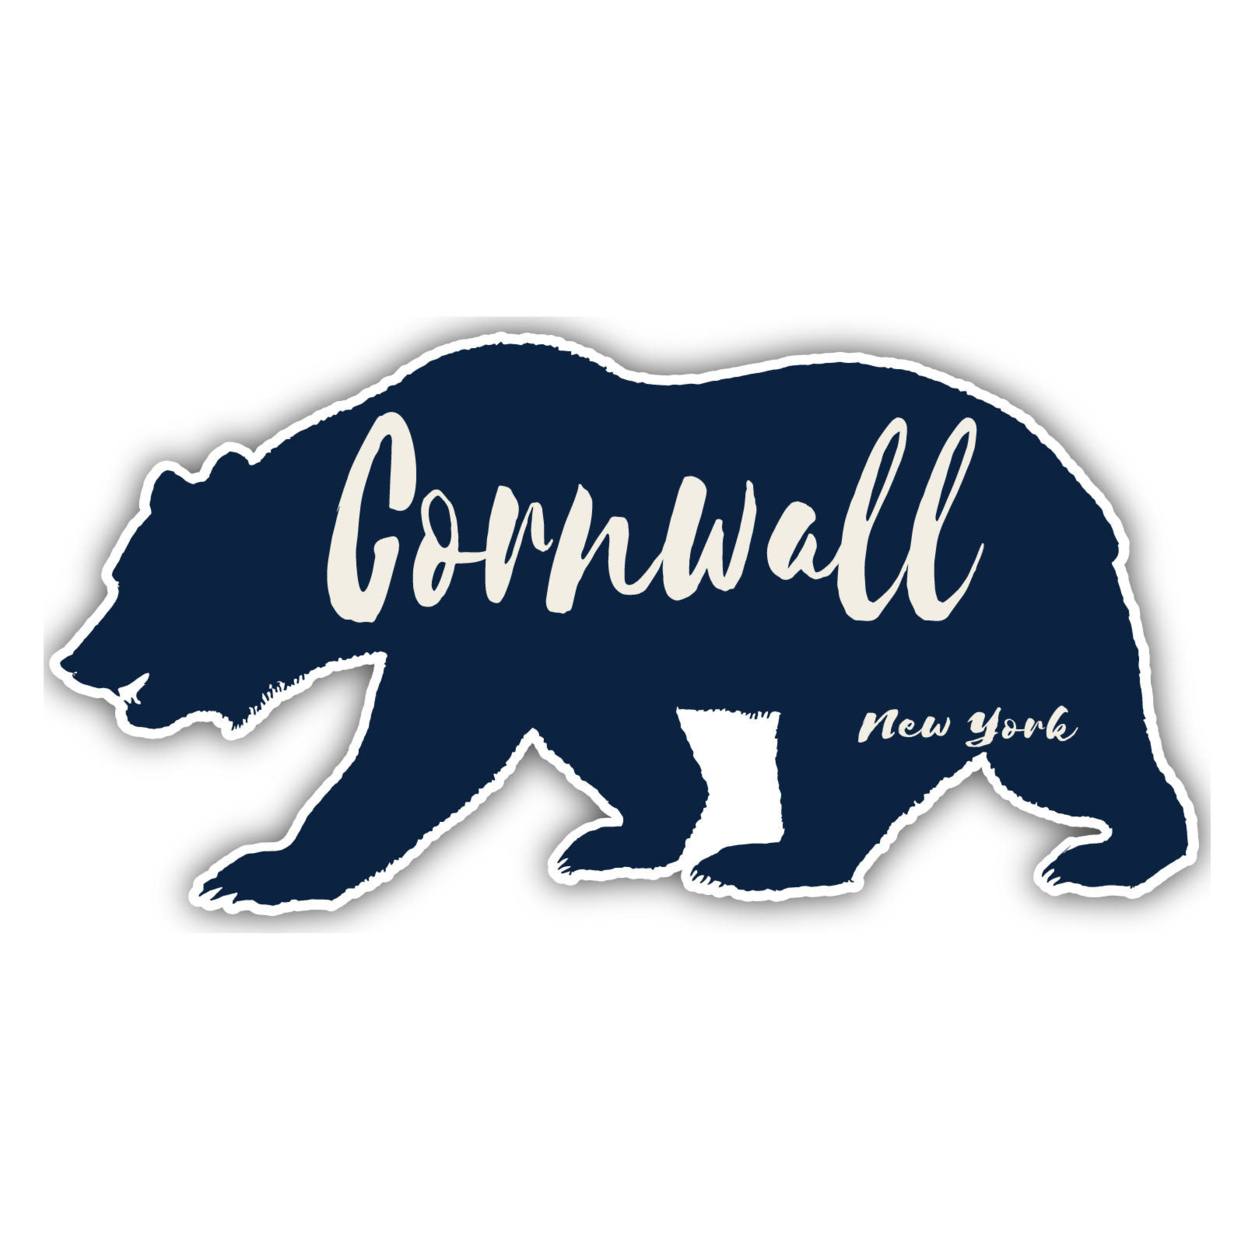 Cornwall New York Souvenir Decorative Stickers (Choose Theme And Size) - 4-Pack, 4-Inch, Bear